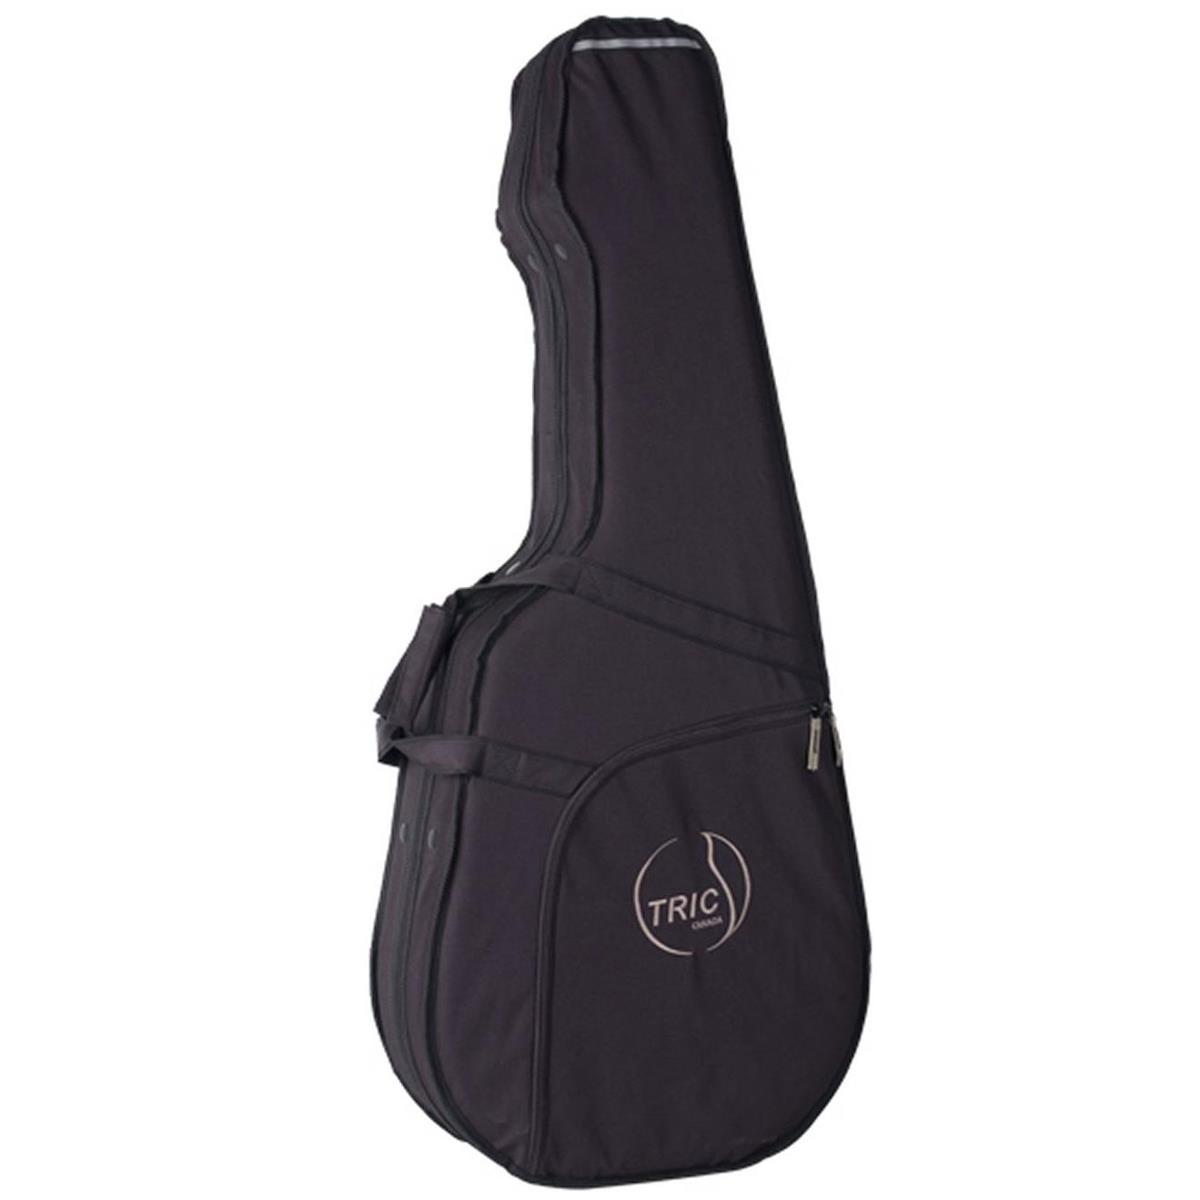 Art & Lutherie TRIC Deluxe Roadhouse Parlor Acoustic Guitar Case, Black -  Art & Lutherie, 038671